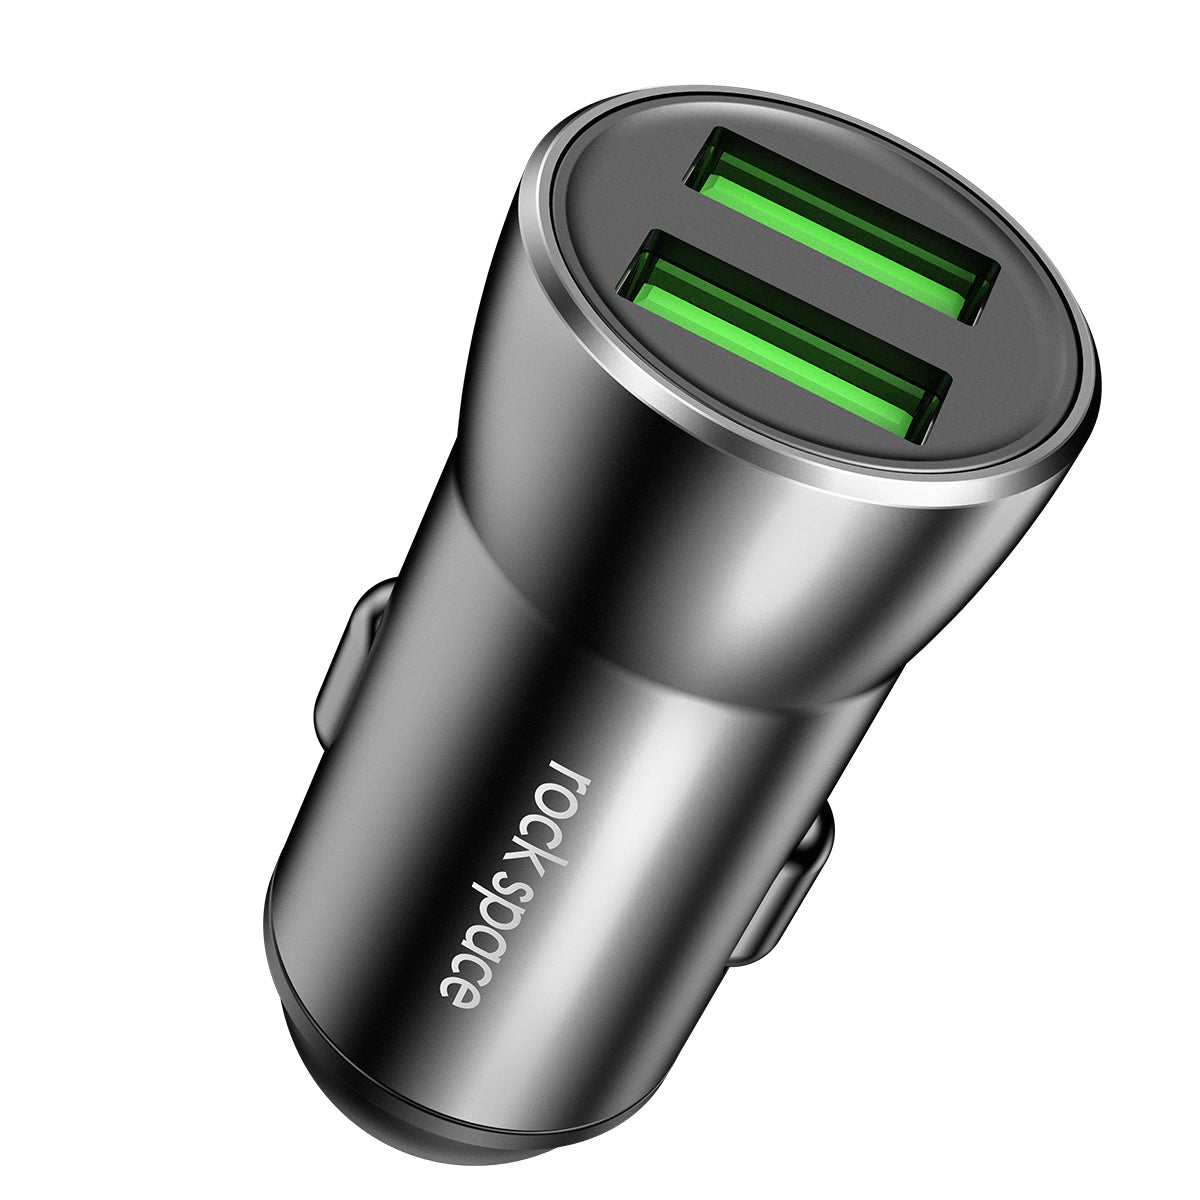 ROCK All Metal Dual USB 4.8A Car Charger For iPhone Xs max/XR/x/7/6s QC 3.0 Mini Car Charger Adapter for Note 9/Galaxy S10/S9/S8 Dual-port power station Car charge--By ROCK